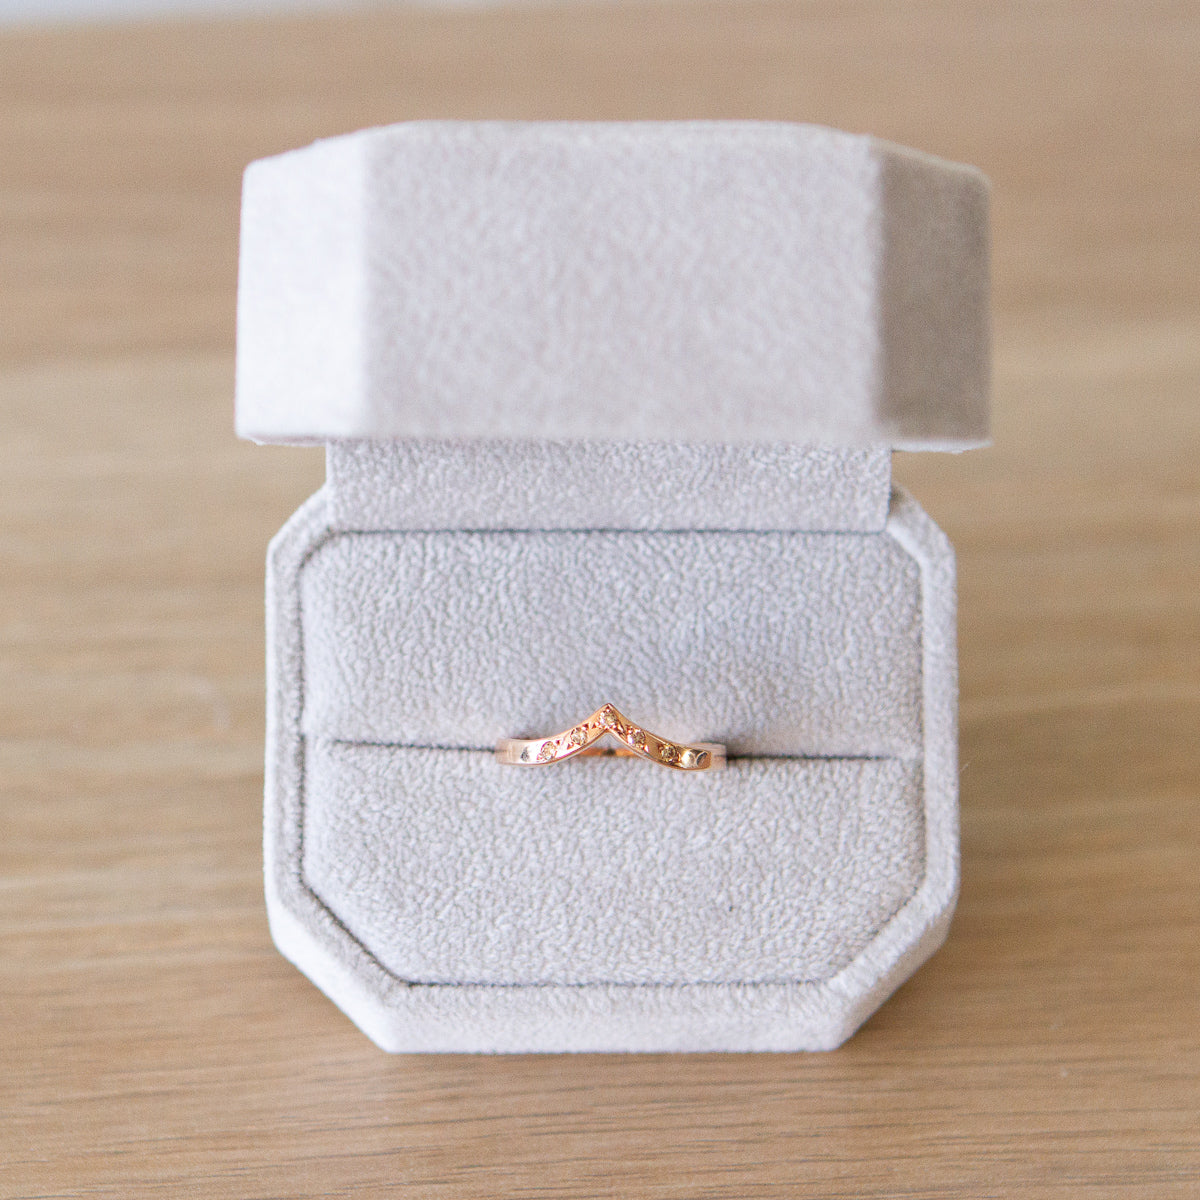 Peaked 14k rose gold band with five champagne diamonds in delicate star settings in a gift box